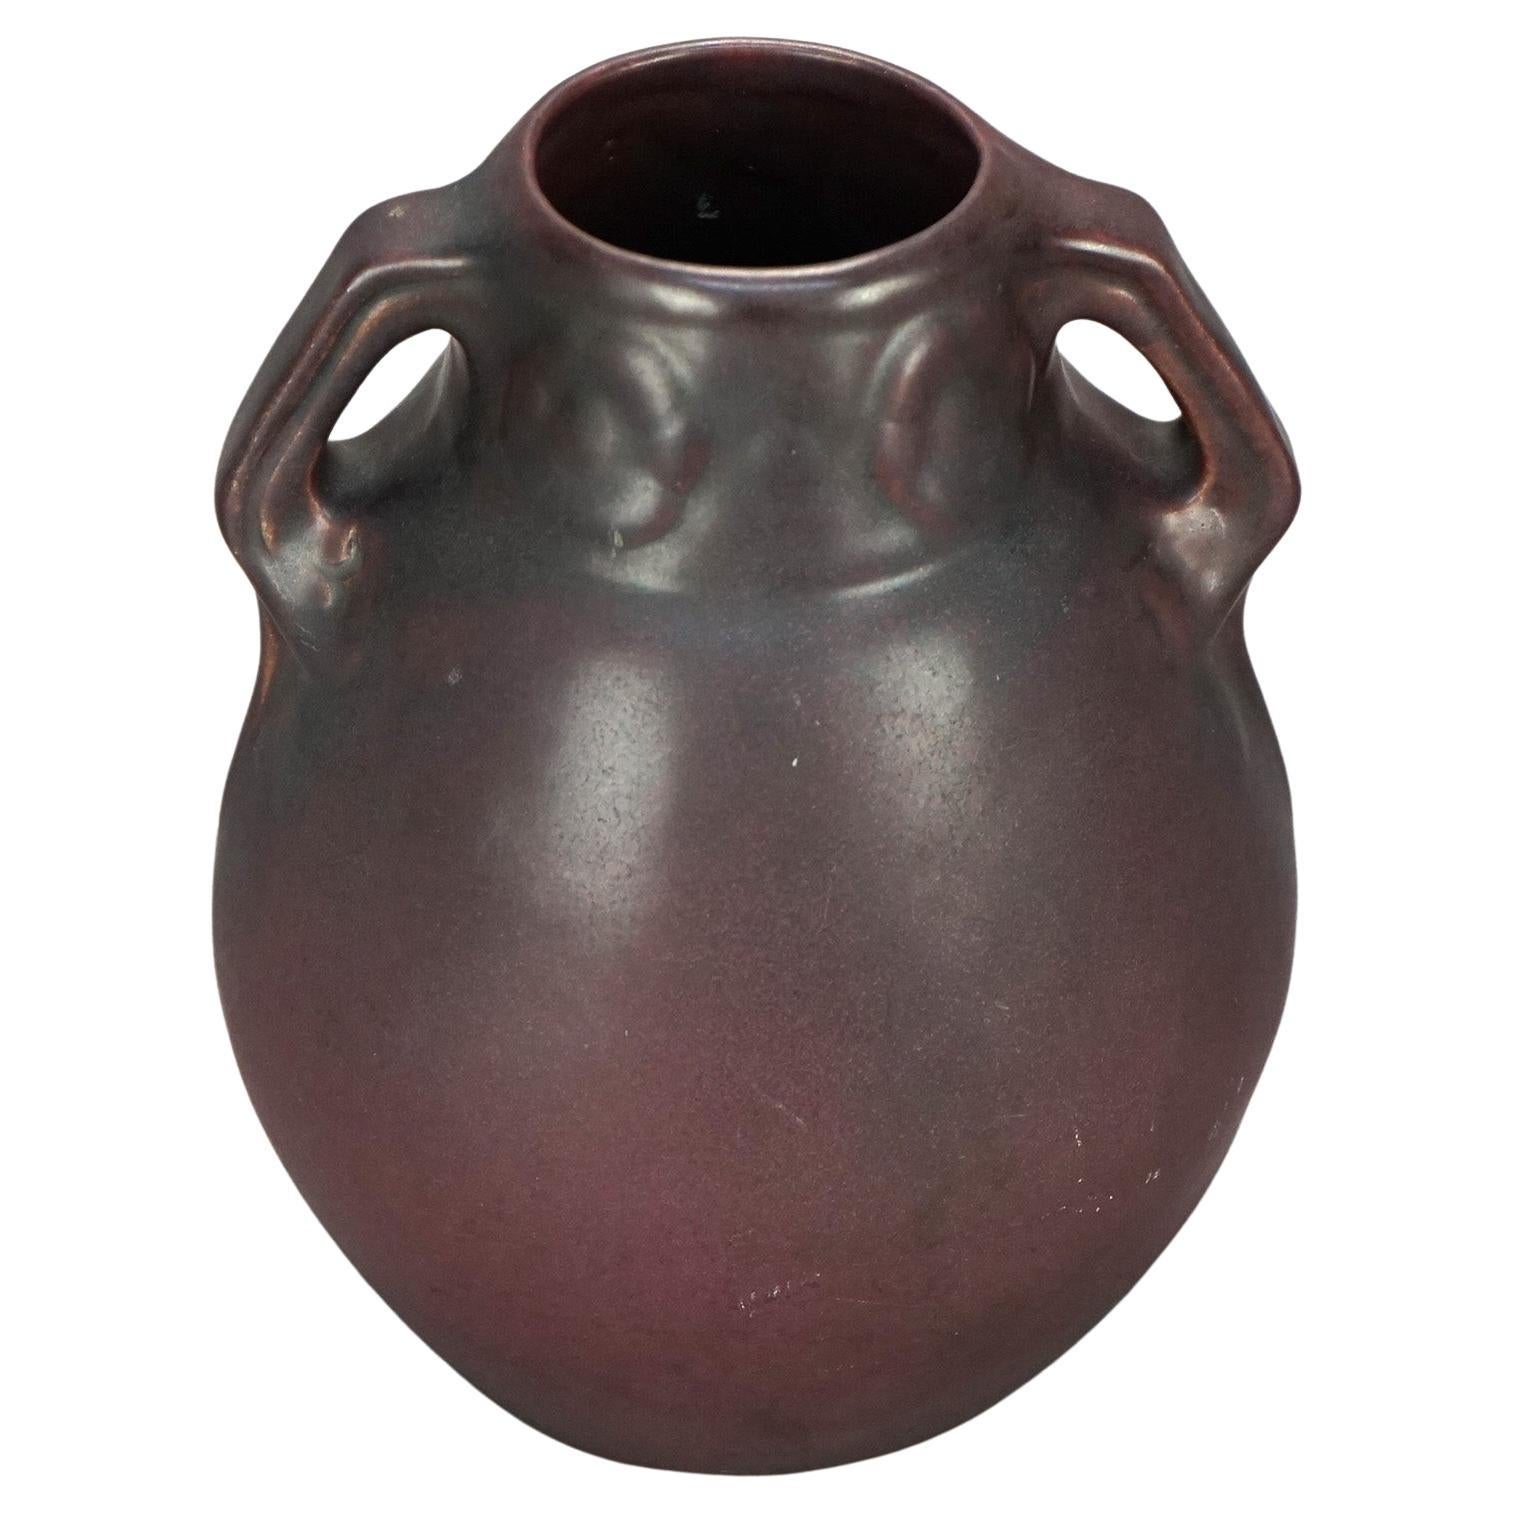 An antique Arts & Crafts vase by Van Briggle offers art pottery construction in bulbous form and having two flanking handles, maker signed on base as photographed, c 1920.

Measures: 12.5' 'H x 4'' W x 5.25'' D.